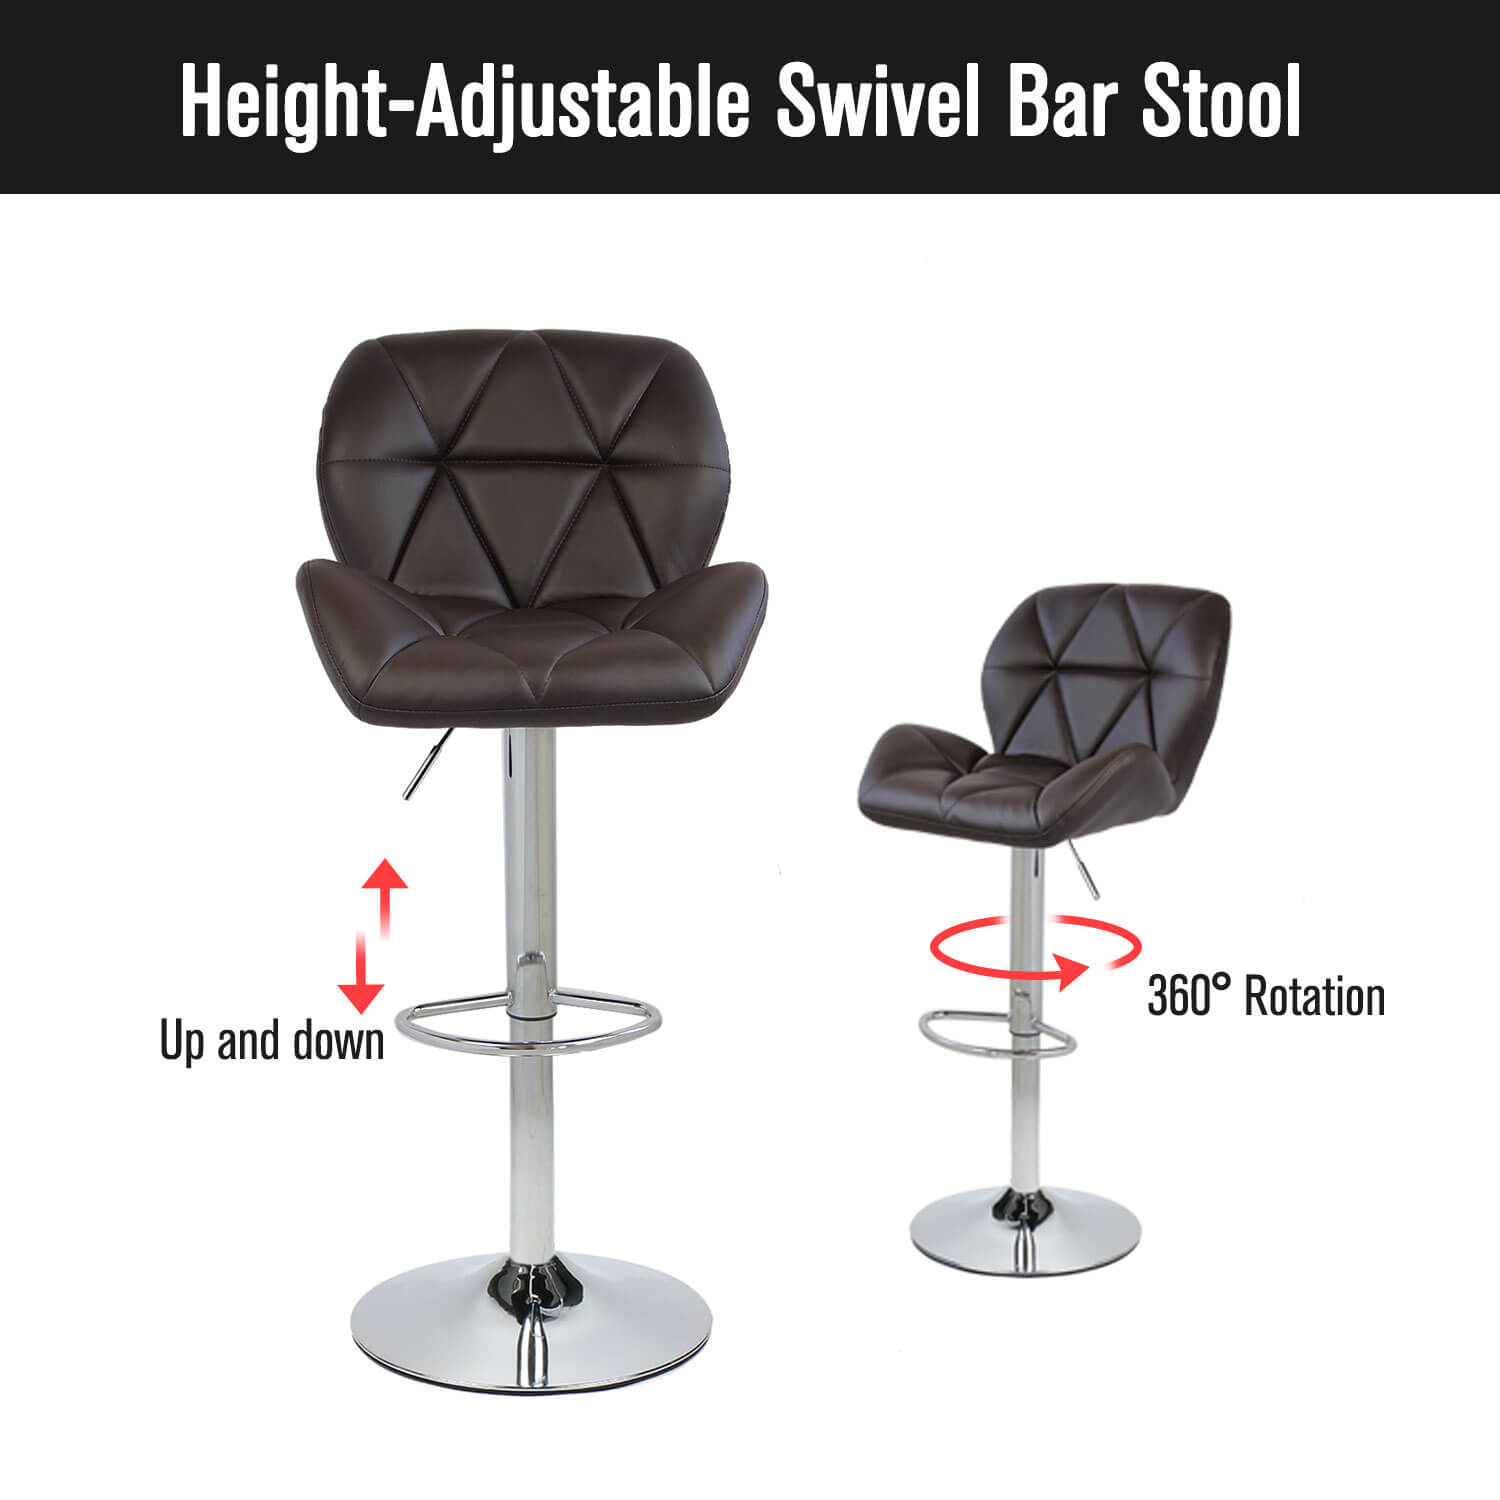 Elecwish brown bar stool OW001 is a height-adjustable swivel bar stool